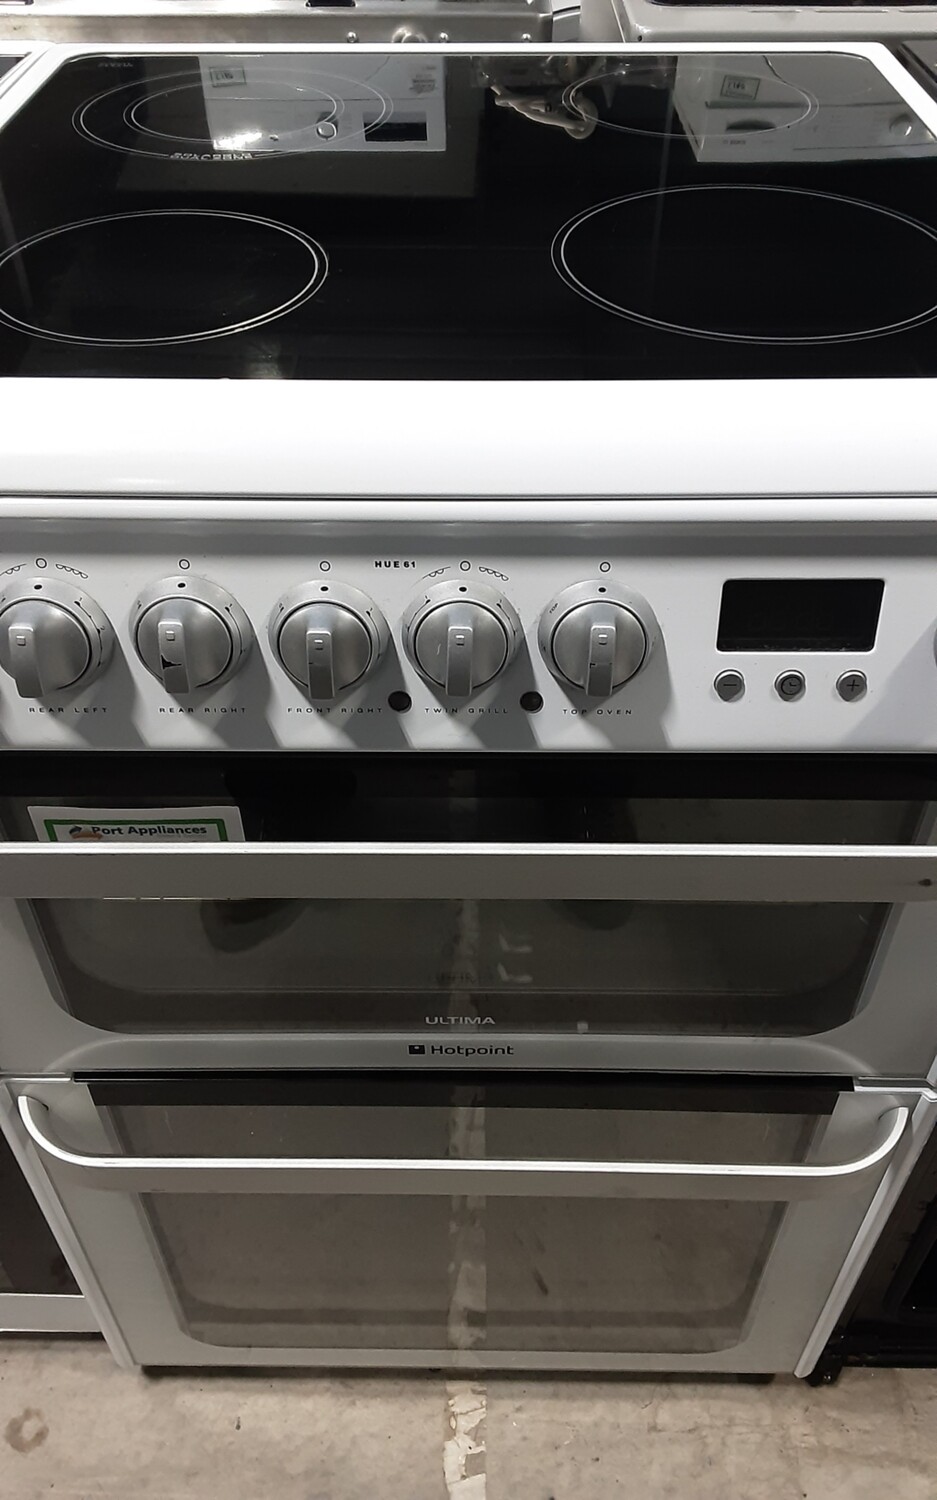 Hotpoint Ultima 60cm Electric cooker Twin Cavity Ceramic Hob - White - Refurbished + 6 month guarantee 